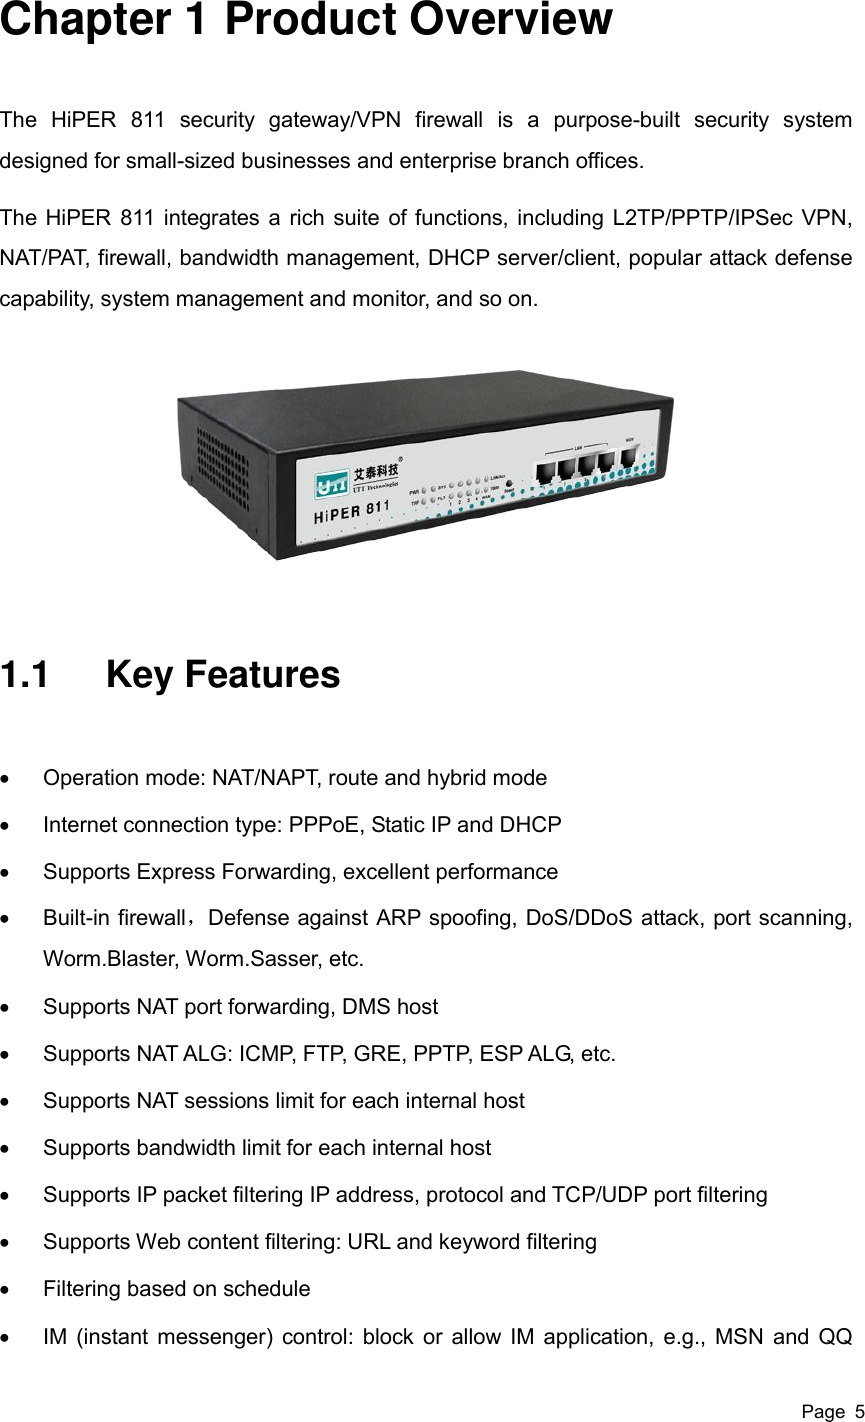  Page  5 Chapter 1 Product Overview The  HiPER  811  security  gateway/VPN  firewall  is  a  purpose-built  security  system designed for small-sized businesses and enterprise branch offices.   The HiPER 811 integrates a rich suite of functions, including L2TP/PPTP/IPSec VPN, NAT/PAT, firewall, bandwidth management, DHCP server/client, popular attack defense capability, system management and monitor, and so on.  1.1  Key Features   Operation mode: NAT/NAPT, route and hybrid mode     Internet connection type: PPPoE, Static IP and DHCP   Supports Express Forwarding, excellent performance     Built-in firewall，Defense against ARP spoofing, DoS/DDoS attack, port scanning, Worm.Blaster, Worm.Sasser, etc.   Supports NAT port forwarding, DMS host   Supports NAT ALG: ICMP, FTP, GRE, PPTP, ESP ALG, etc.   Supports NAT sessions limit for each internal host   Supports bandwidth limit for each internal host   Supports IP packet filtering IP address, protocol and TCP/UDP port filtering   Supports Web content filtering: URL and keyword filtering   Filtering based on schedule   IM (instant messenger) control: block or allow IM application, e.g., MSN and QQ 